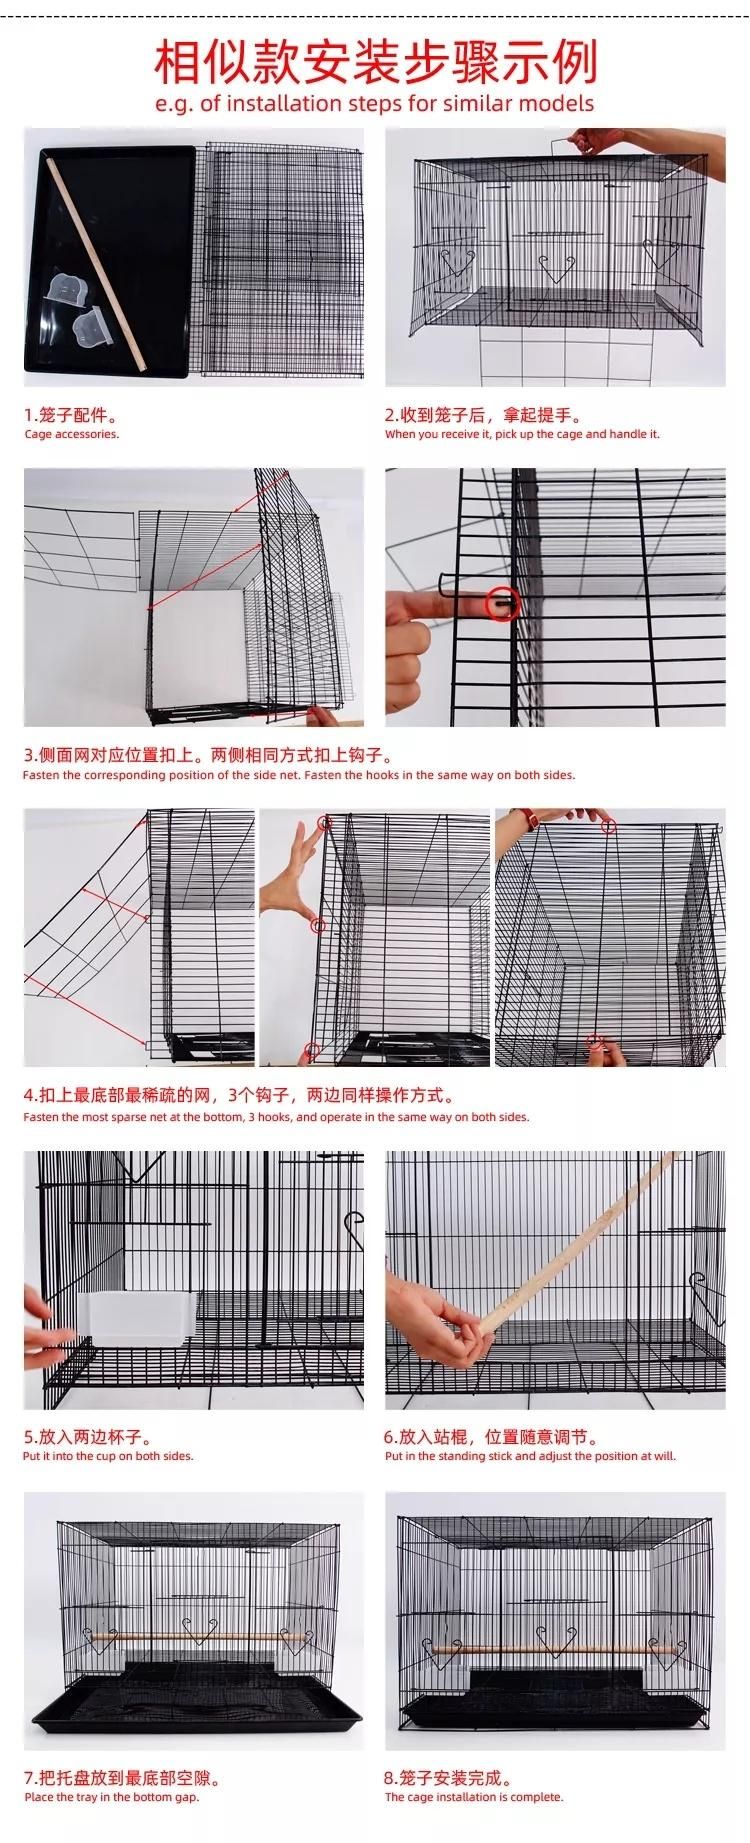 4 Cups Large Square Custom Metal Wire Travel Parrot Bird Rabbit Pet Animal Carrier Transport Cage